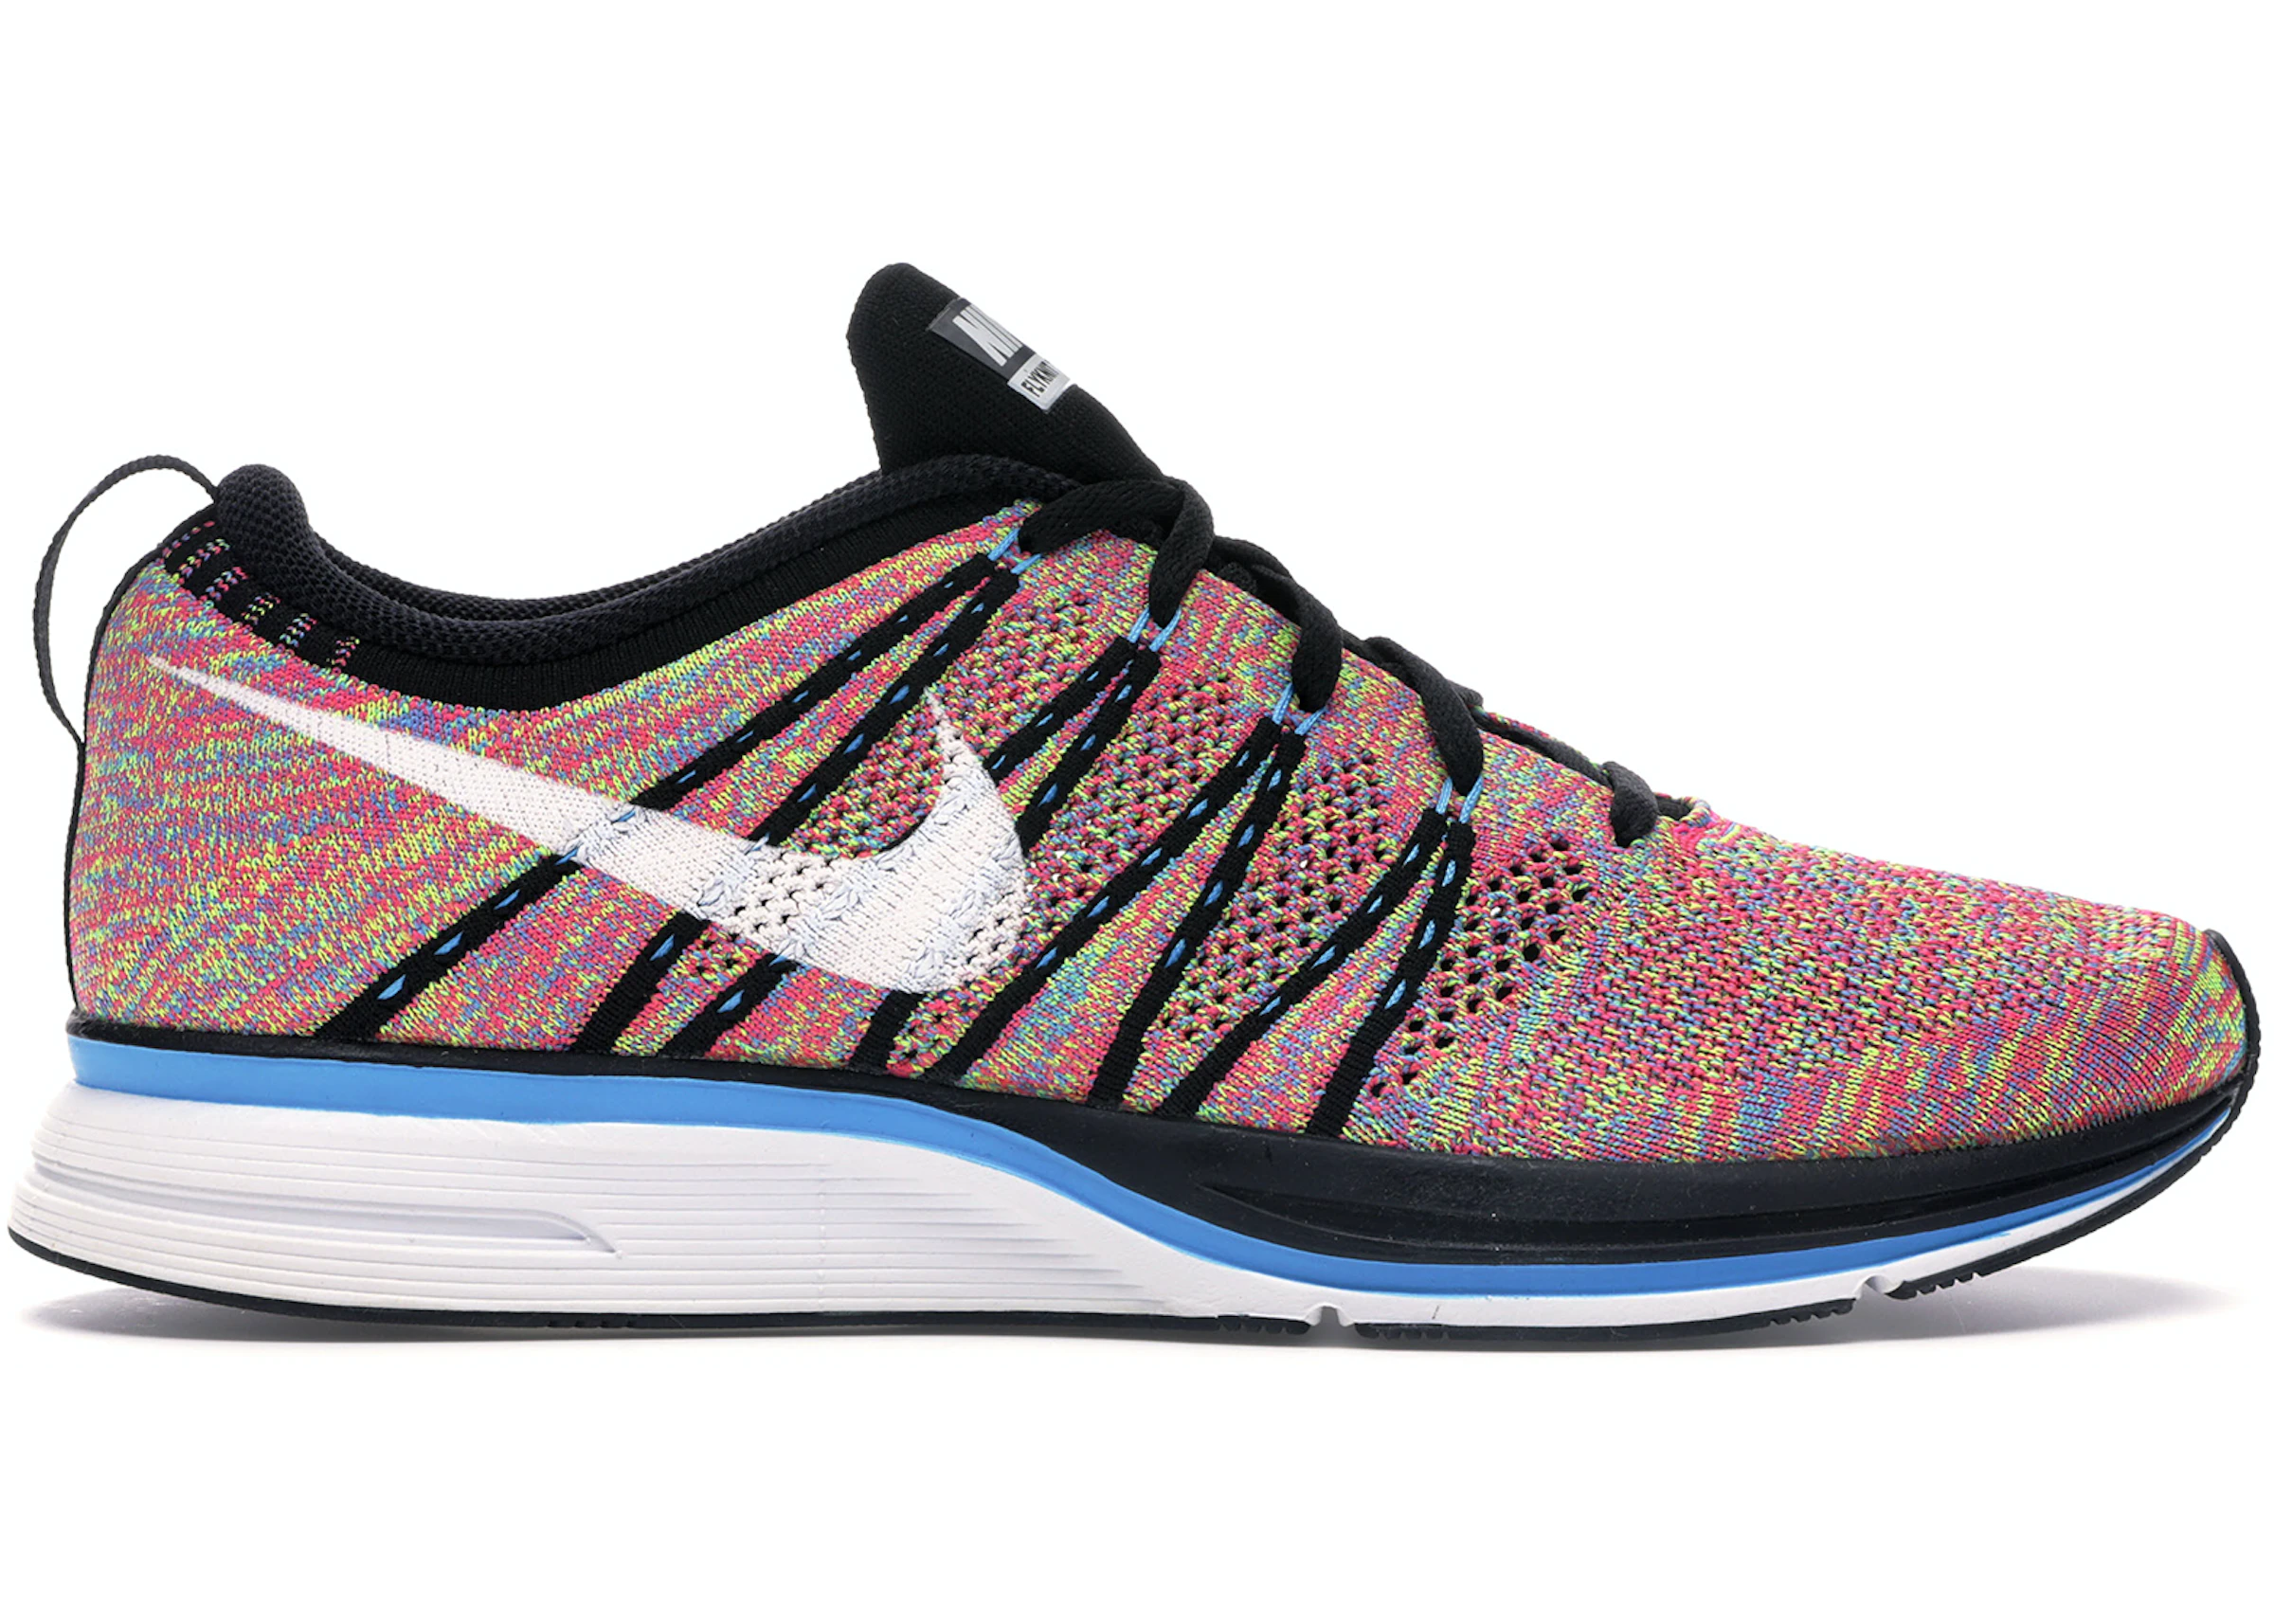 Nike Flyknit Trainer Multi-Color - 532984-014 US